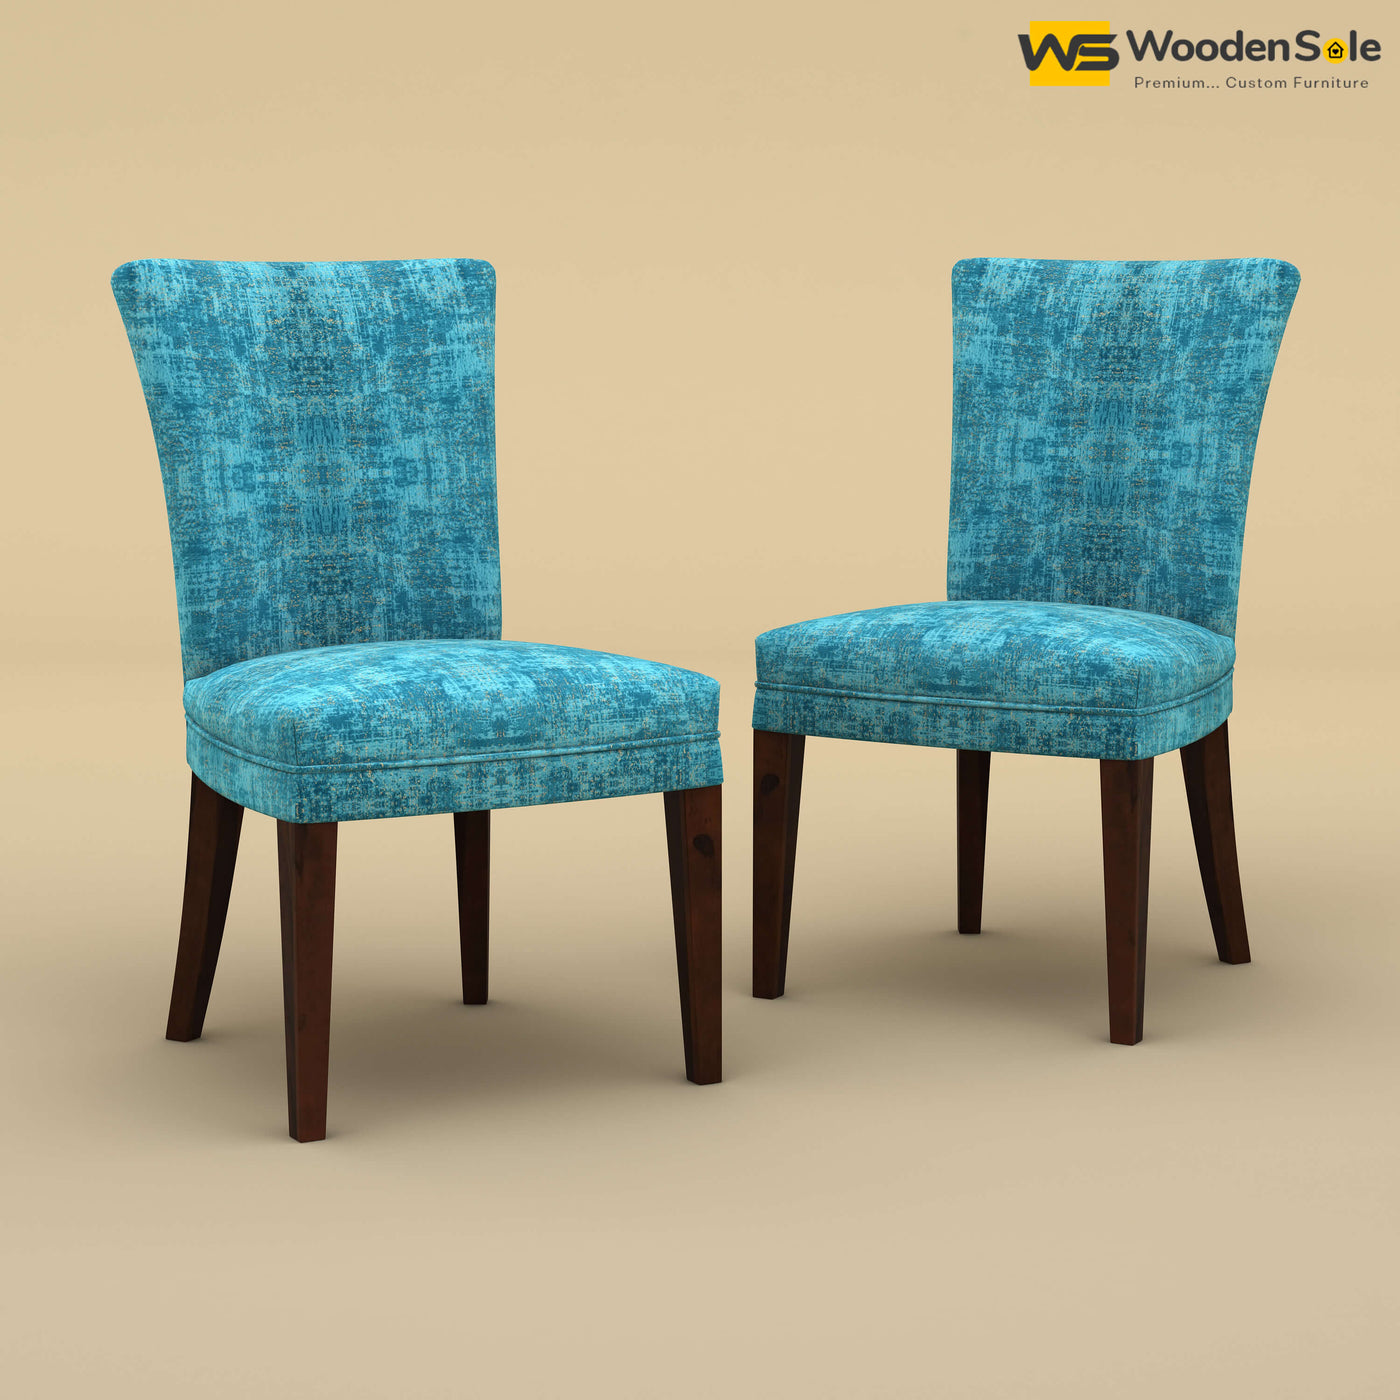 Bently Dining Chairs - Set of 2 (Cotton, Teal Blue)